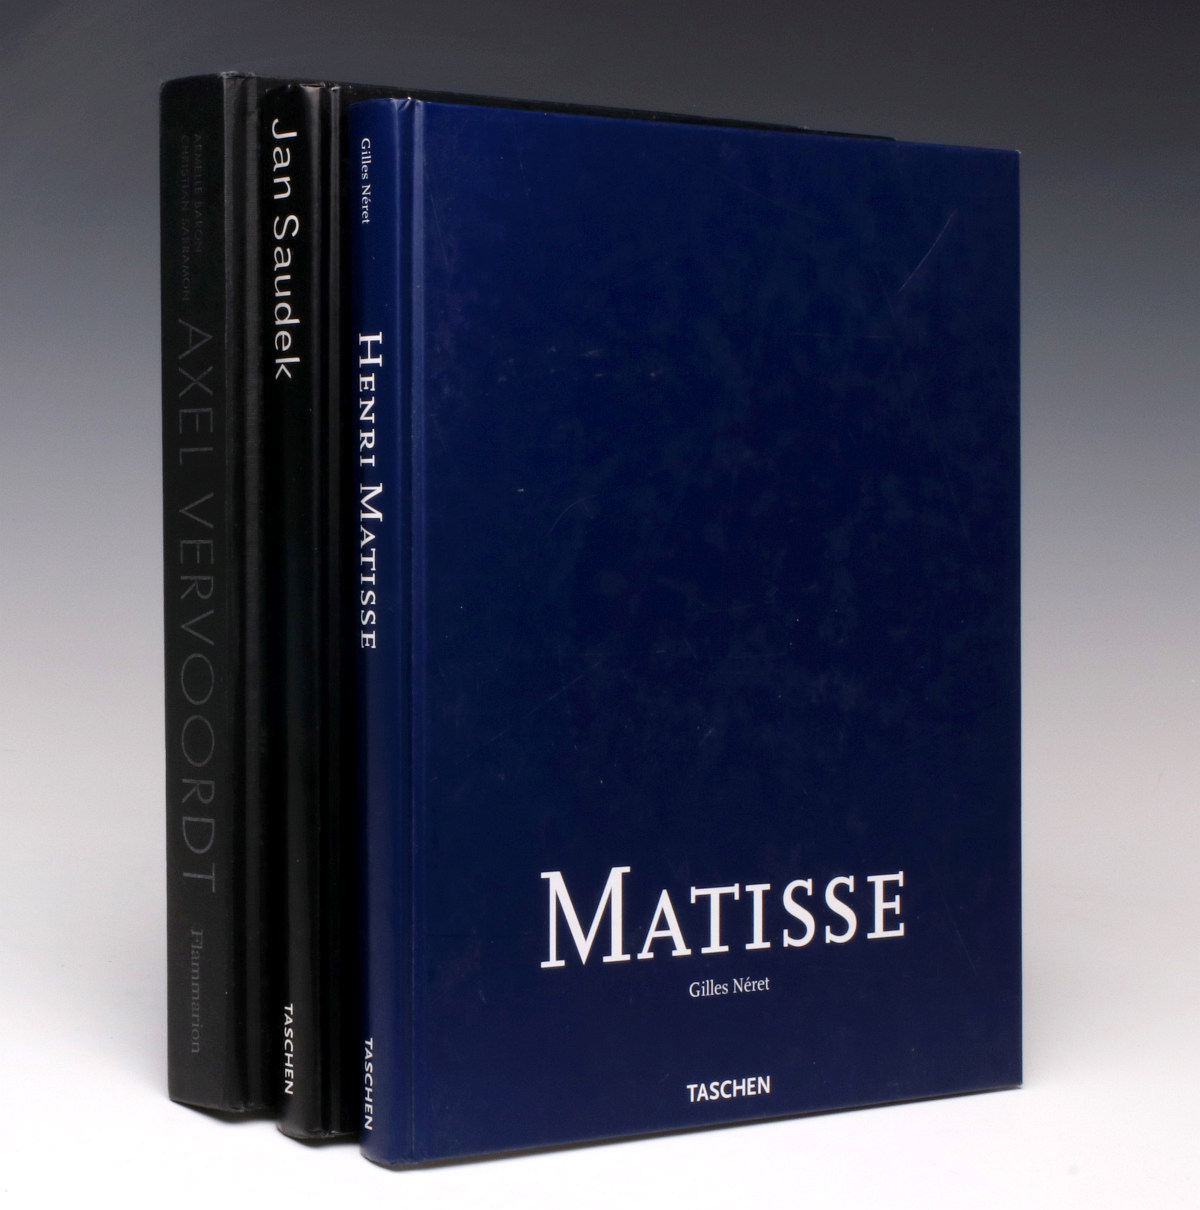 A COLLECTION OF ARTIST CATALOG BOOKS